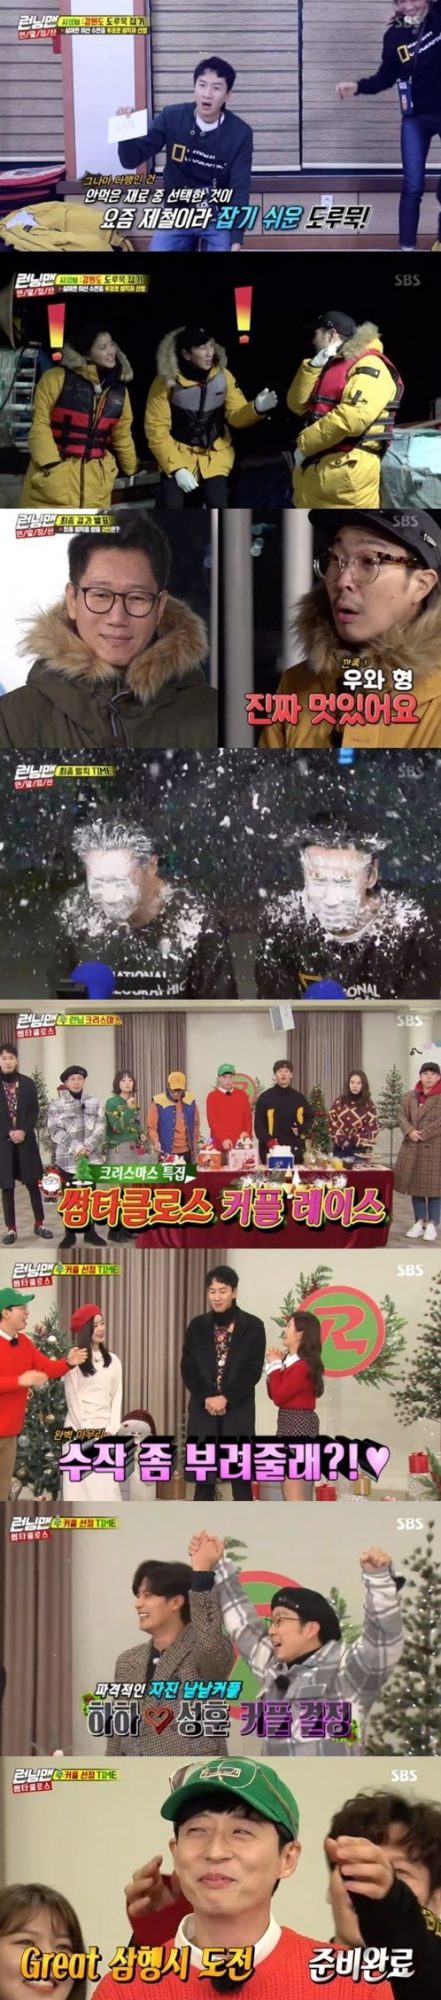 <p>Comedian Yoo Jae Suk the SBS ‘Running Man’in witty Samshan ‘best 1 minute’ passport.</p><p>What according to last 23 days broadcast of ‘Running Man’per minute, with a maximum application rate of 8. 4%(the NCR furniture viewership standard)up to climbed. 2049 target viewership is 4. 1%for the ‘Yes’ of the strong proved.</p><p>It is the members that while progress had Global The Mission of ‘failing The Mission’in play ‘The Mission year-end settlement : great race’results ‘with size of each feature race : thumb, - ’furnished.</p><p>Ahead 3 team of The Mission settlement result, these options belong to the management team all The Mission to success by penalty box or not, but by voting in a special penalty box. Ago min team ‘cotton Hell’Falls in second after The Mission ‘in Hong Kong, Chow Yun-fat and authentication shot’, was a challenge but failed and not necessarily the penalty box and had. This in analysis with penalties who received this light with the punishment received. Now the analysis is “we design once and let the”burning revenge, lust....</p><p>‘Chris Thomas Featured Race : Claudia Claus’in Girl swim, learn, box, Han Sunhwa, Jeon Hye-Bin, star Hoon, singer Michael Bublé is the delightful couple the start of the race. Han Sunhwa is opening early ‘couple selection’in Yoo Jae Suk on ‘Samshan humiliation’to you. Since the situation is reversed No Way Back ‘Couple selection’, Yoo Jae Suk in the Samshan, the station needs to down price progress as a laugh, I found myself.</p><p>Members by the legs and the glasses till take off was a polite Yoo Jae Suk is a straight “one : Han Sunhwa, line : Shenhua seeds, why now?, Angry : angry I am!”Called witty Samshan presented and, finally, Han Sunhwa and couples. This scene is per minute, with a maximum application rate of 8. Up to 4% soars ‘best 1 minute’.</p><p>Next weeks broadcast on ‘big, we Featured Race : Claudia Claus’authentic race unfolds.</p>